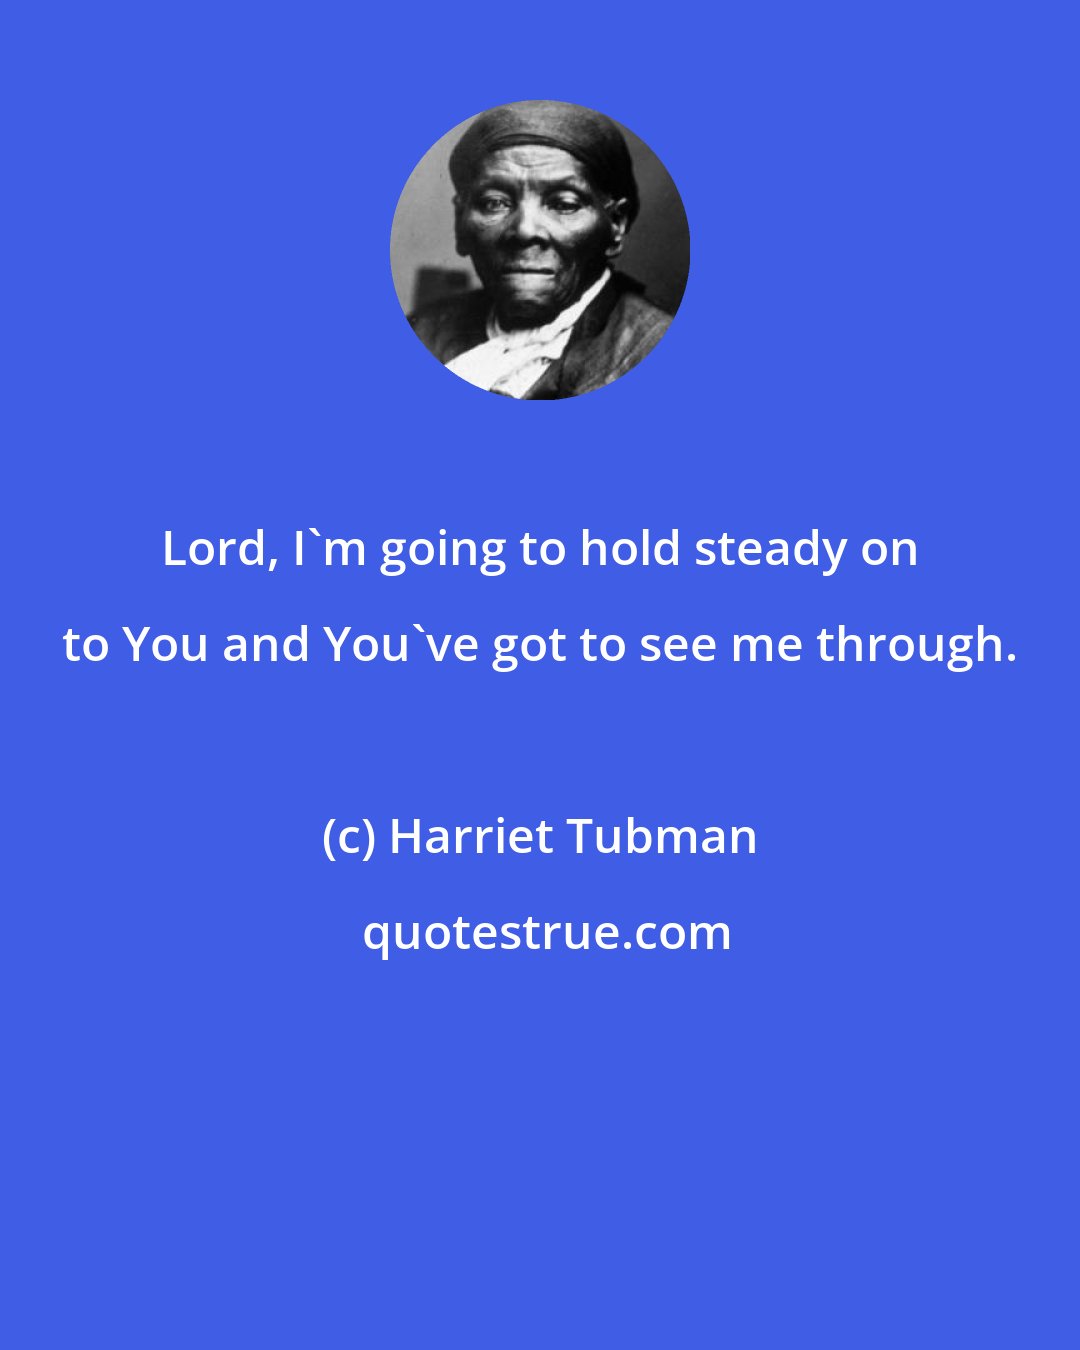 Harriet Tubman: Lord, I'm going to hold steady on to You and You've got to see me through.